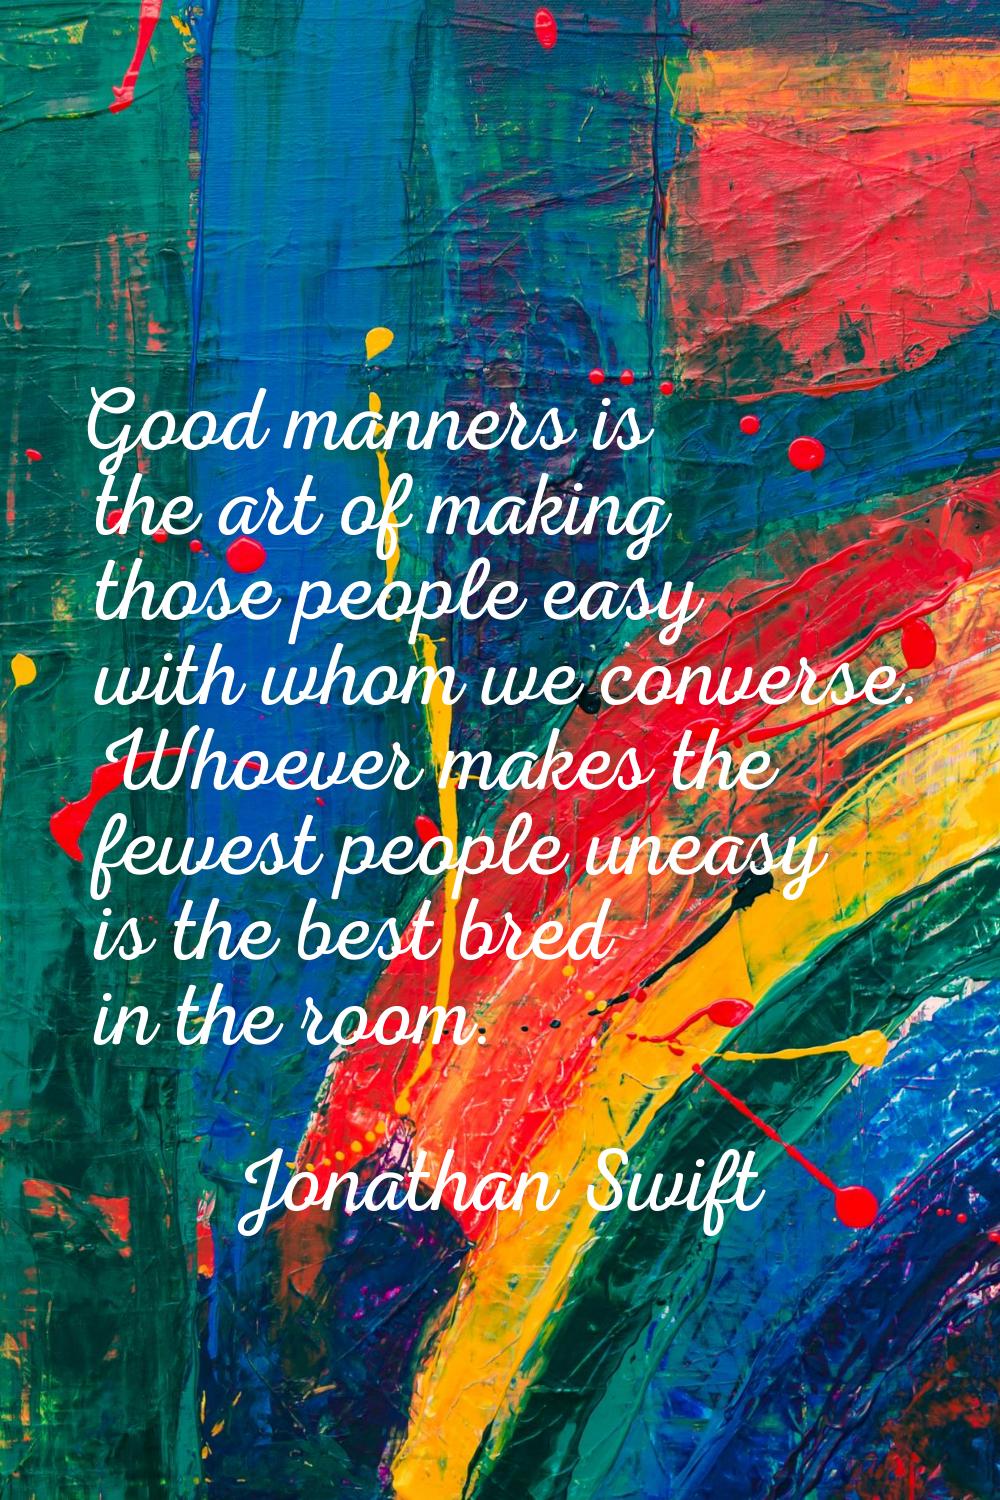 Good manners is the art of making those people easy with whom we converse. Whoever makes the fewest